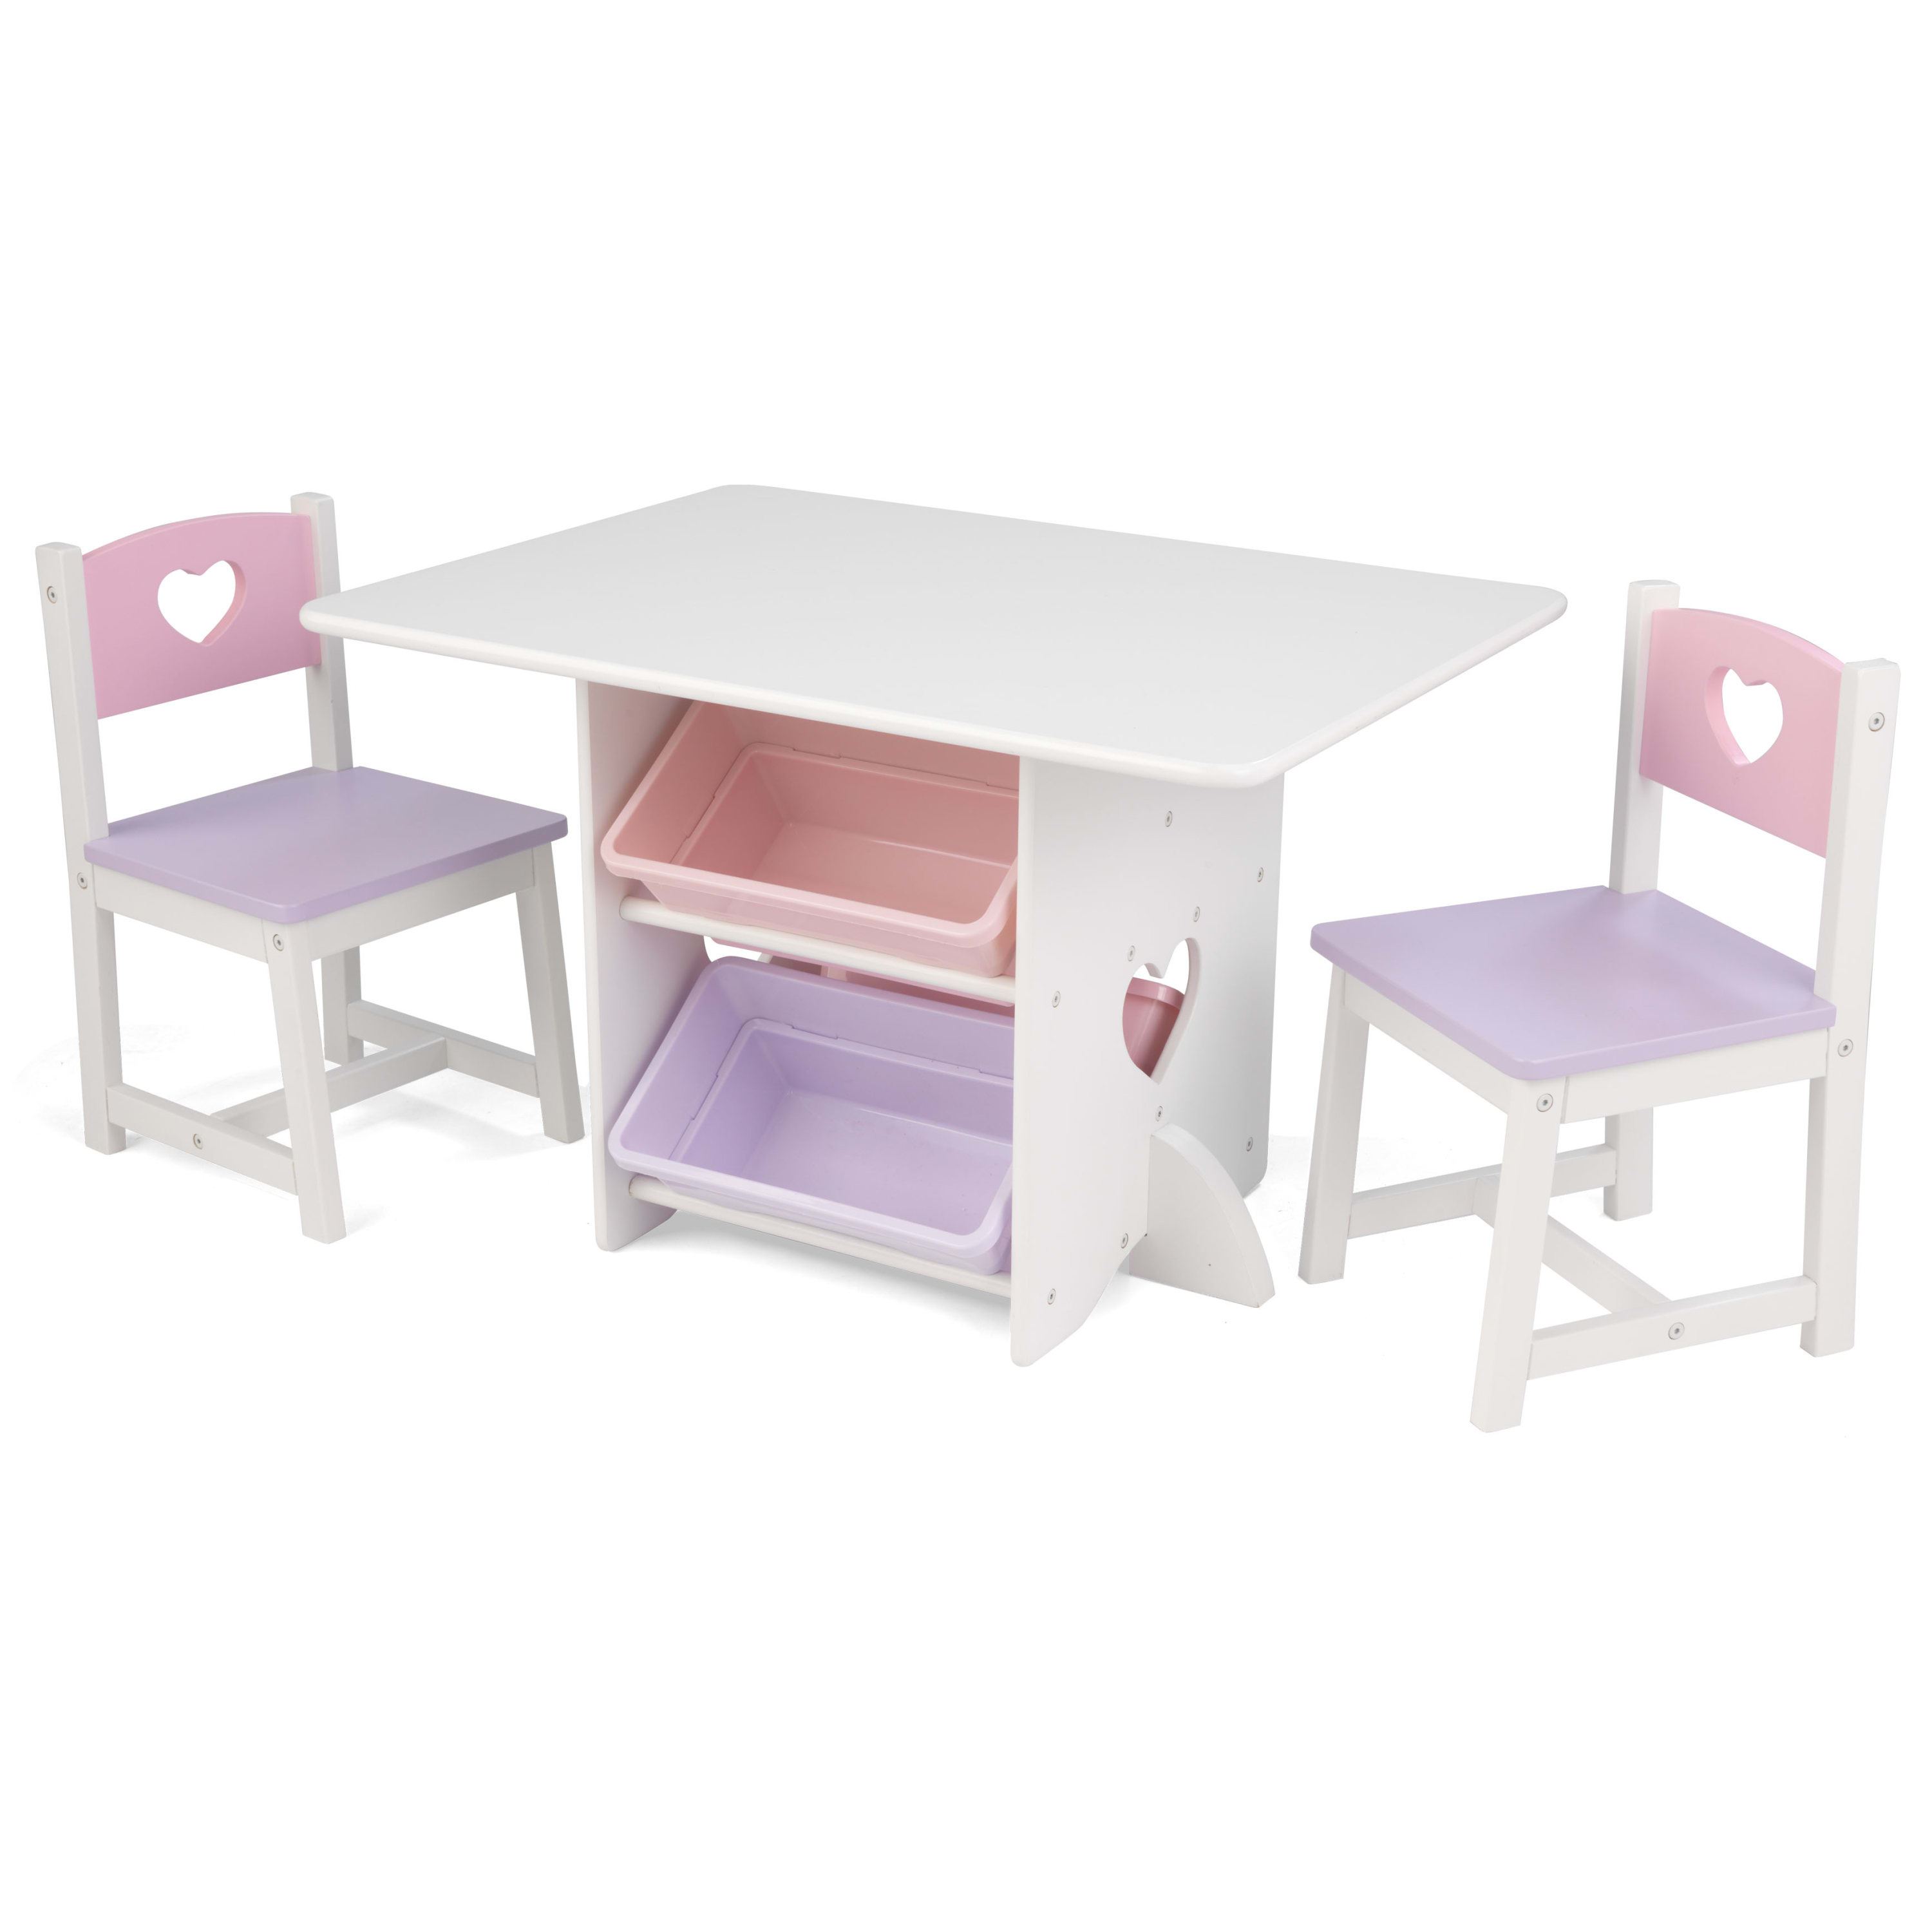 KidKraft Wooden Heart Table & Chair Set with 4 Bins, Pink, Purple & White, for Ages 3+ - image 1 of 7